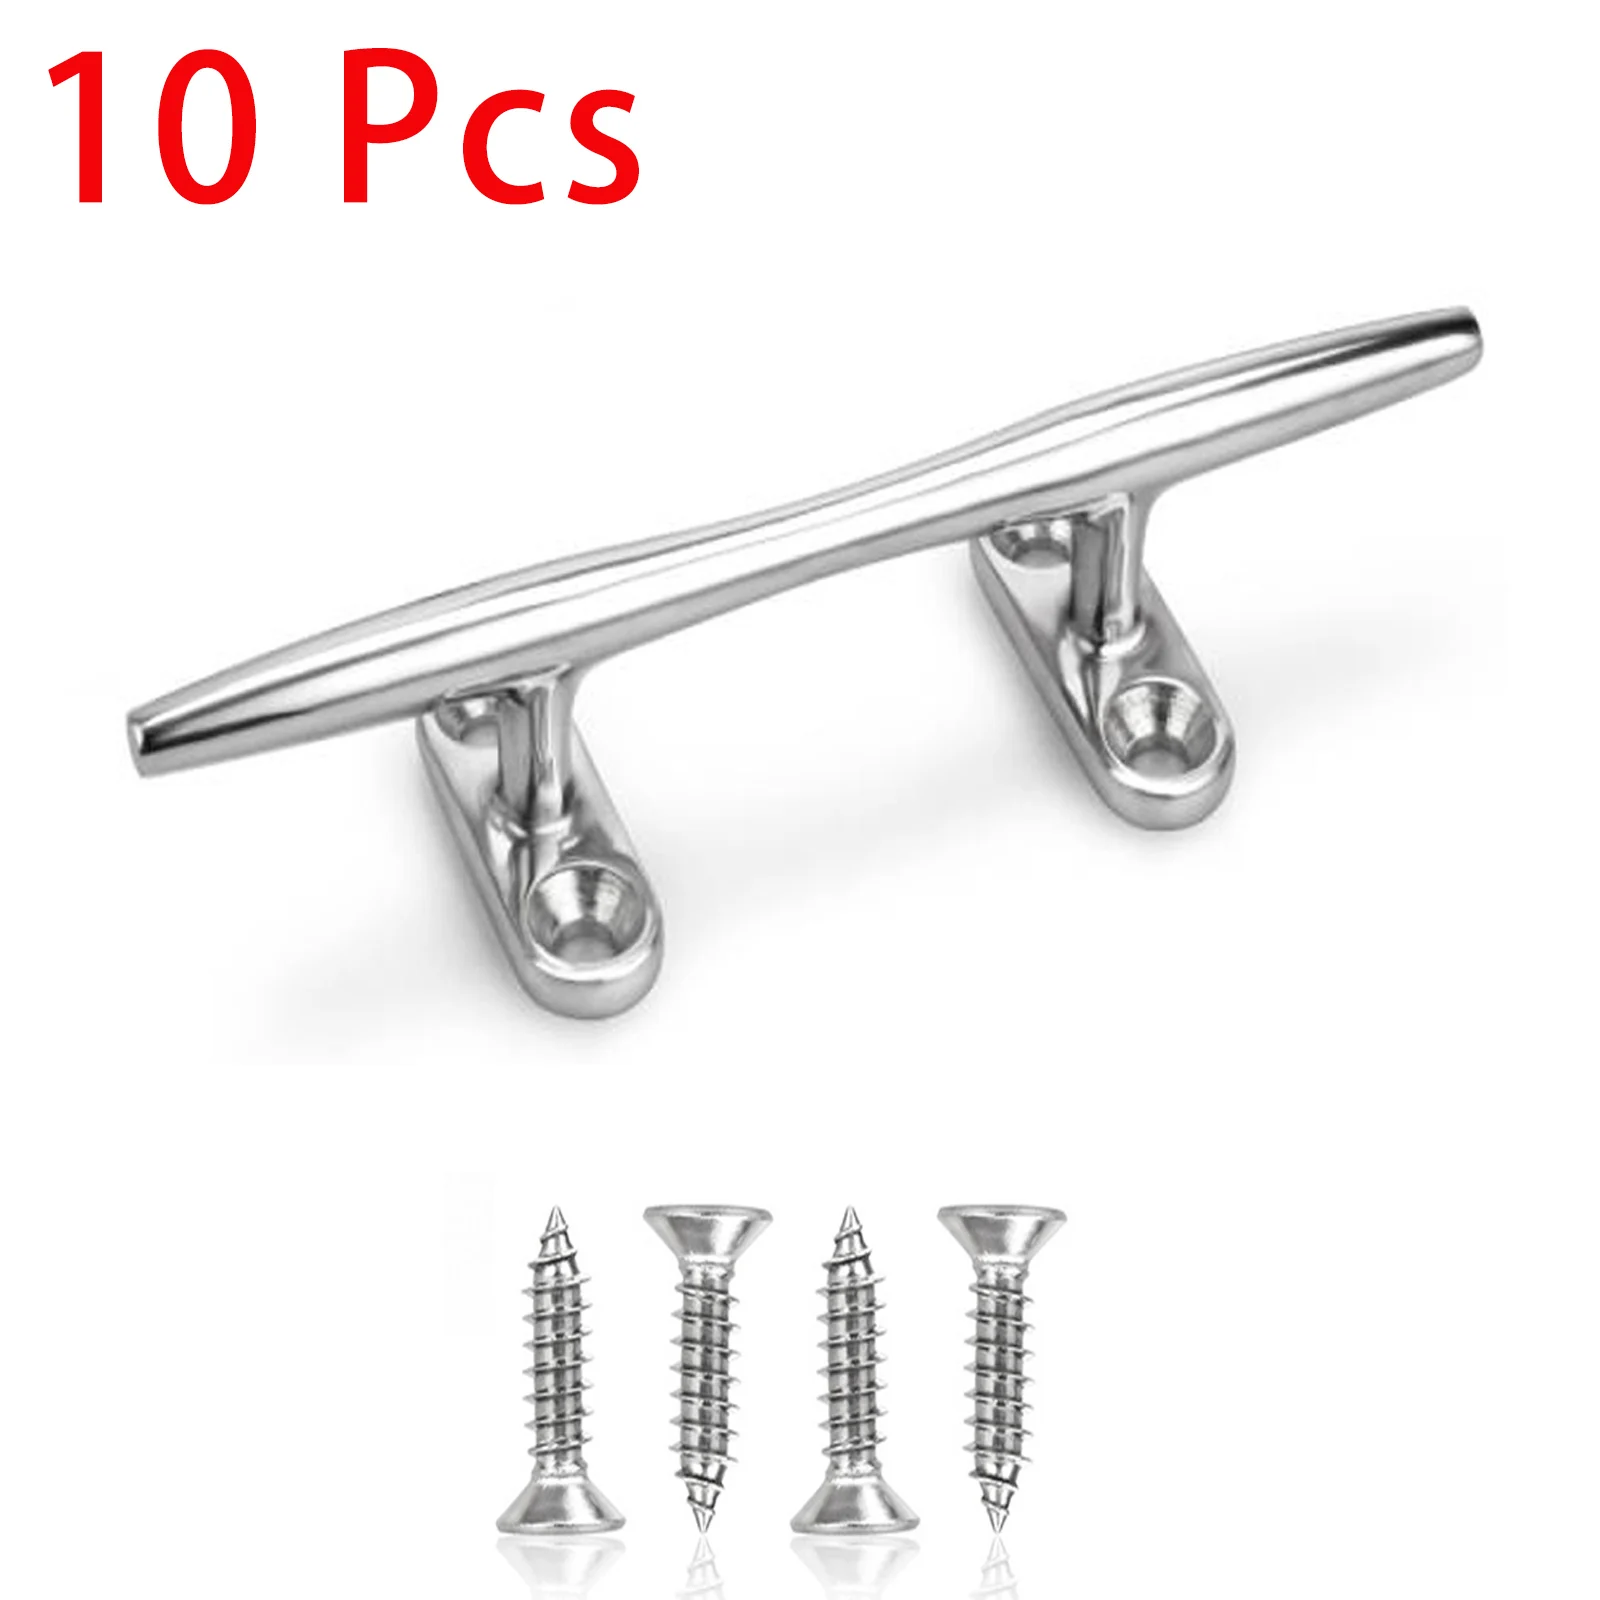 Boat Dock Cleat 6 inch Boat Cleat Open Base, Marine Heavy Duty 316 Stainless Steel with 40 Pcs Screws(10 Packs)